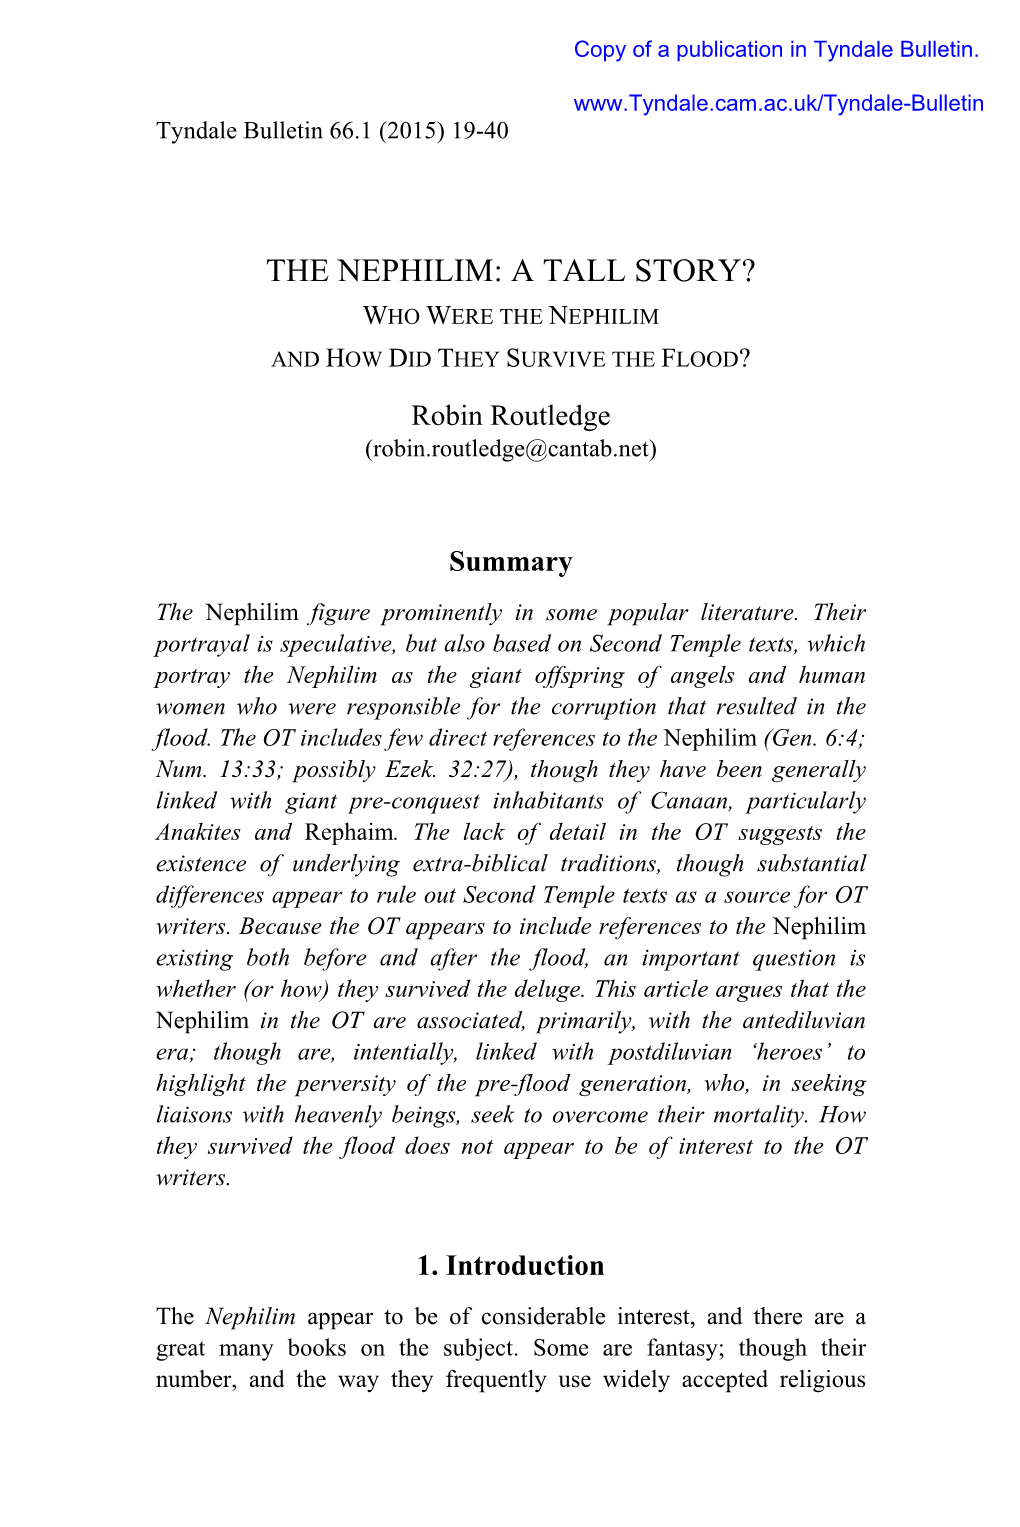 The Nephilim: a Tall Story? Who Were the Nephilim and How Did They Survive the Flood?